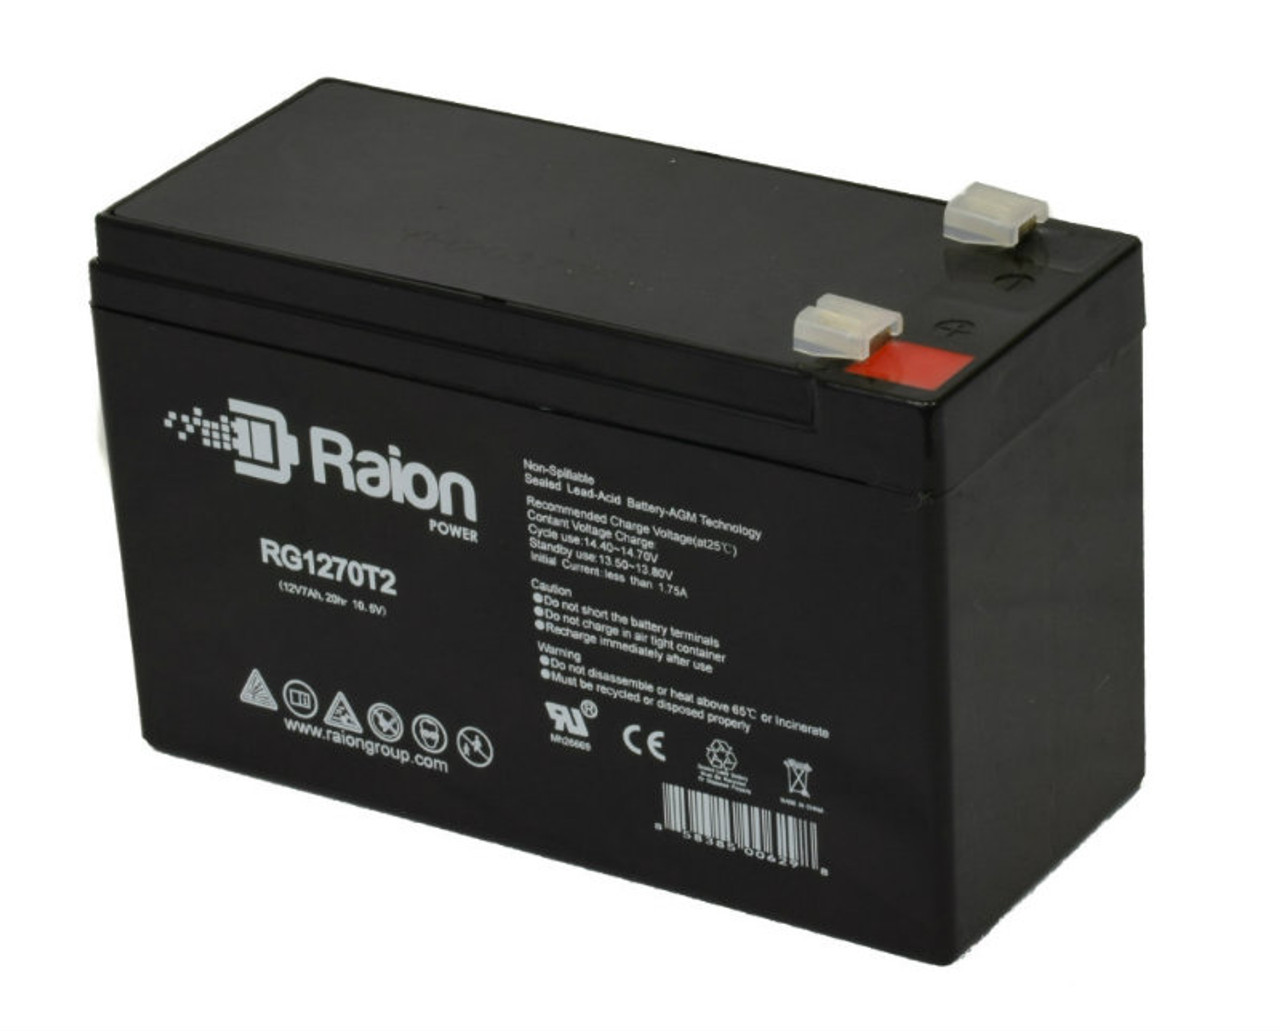 Raion Power RG1270T1 12V 7Ah Non-Spillable Replacement Battery for SSB SB 7-12 F1